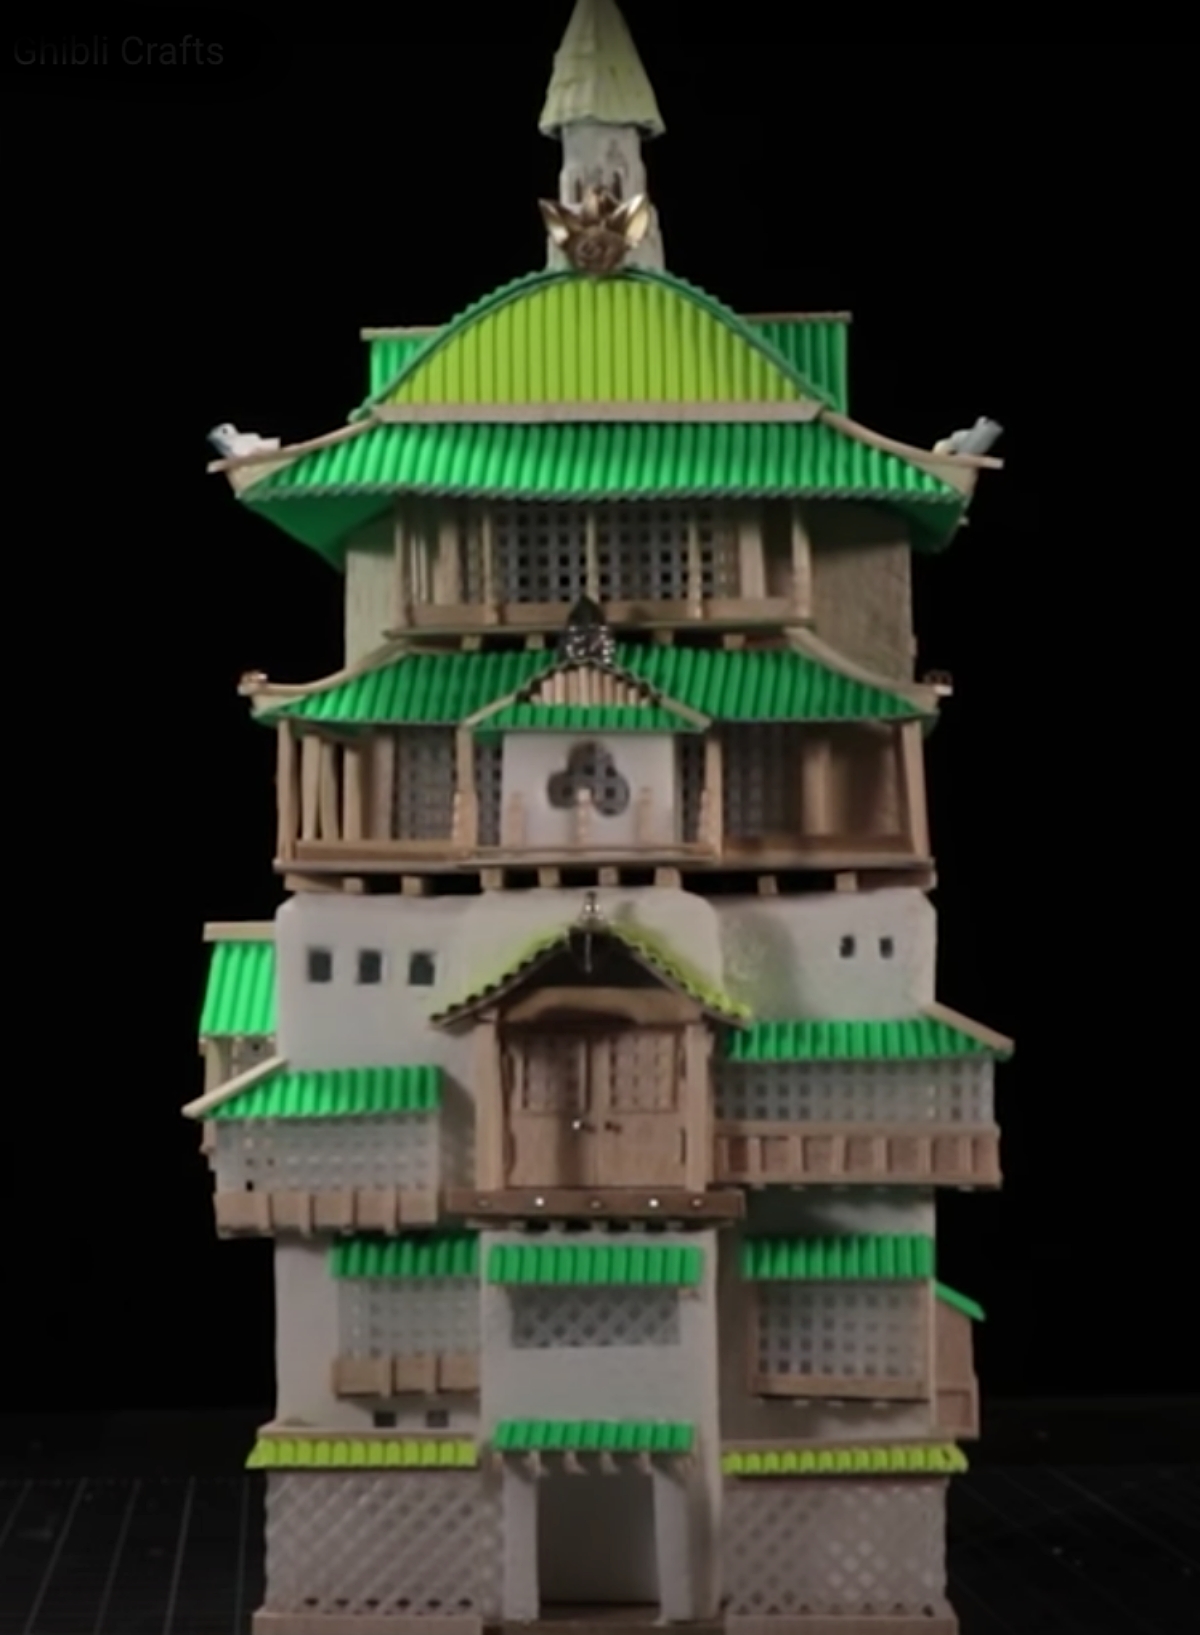 miniature version of the bathhouse from Spirited Away